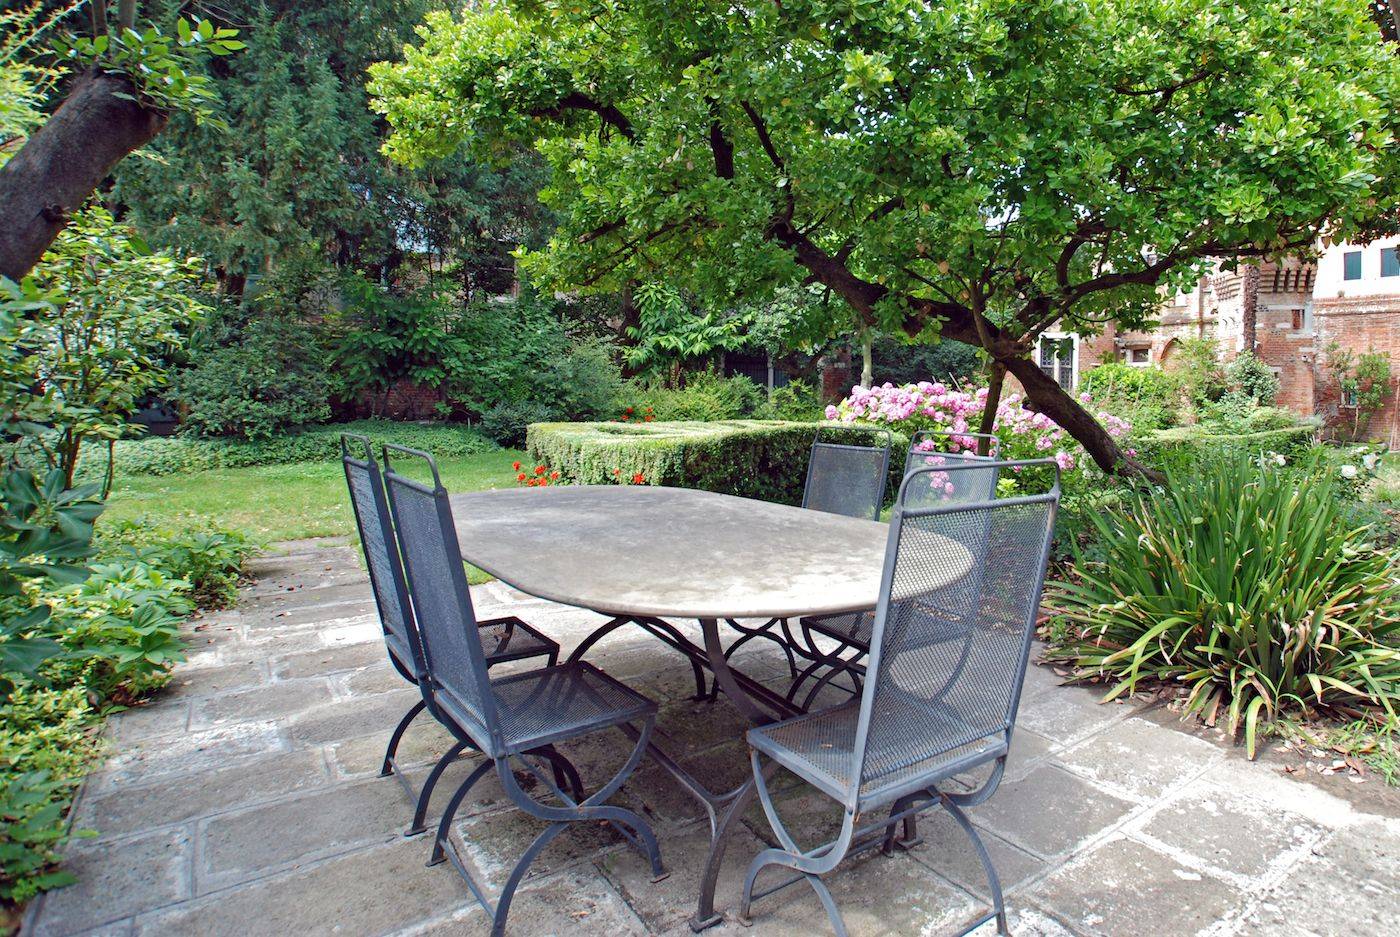 in the garden there is a large metal table with 8 chairs